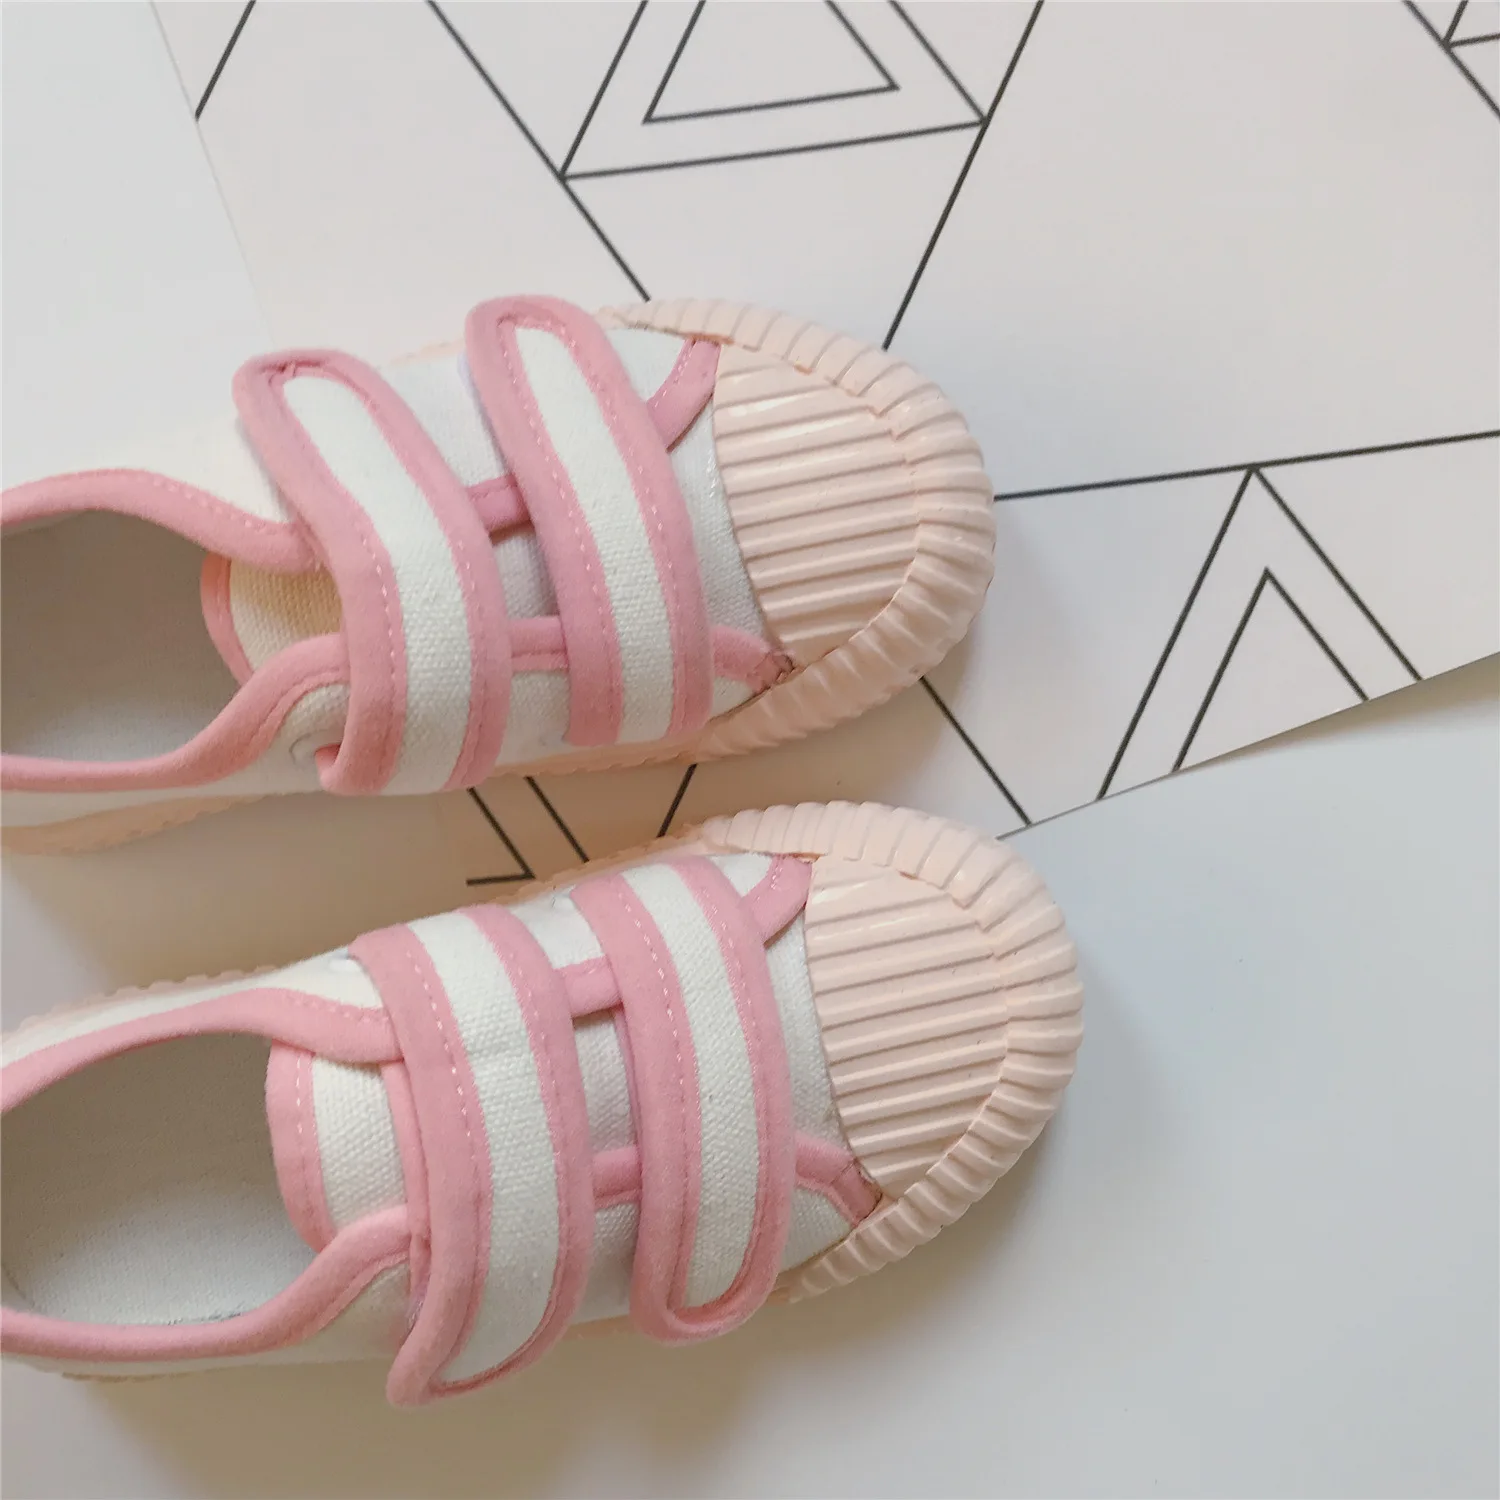 Korean Children Hit-and-break Magic Canvas Shoes Toddler Baby Anti-slip Shoes Kids All Matcheshoes Spliced Color Girls Shoes